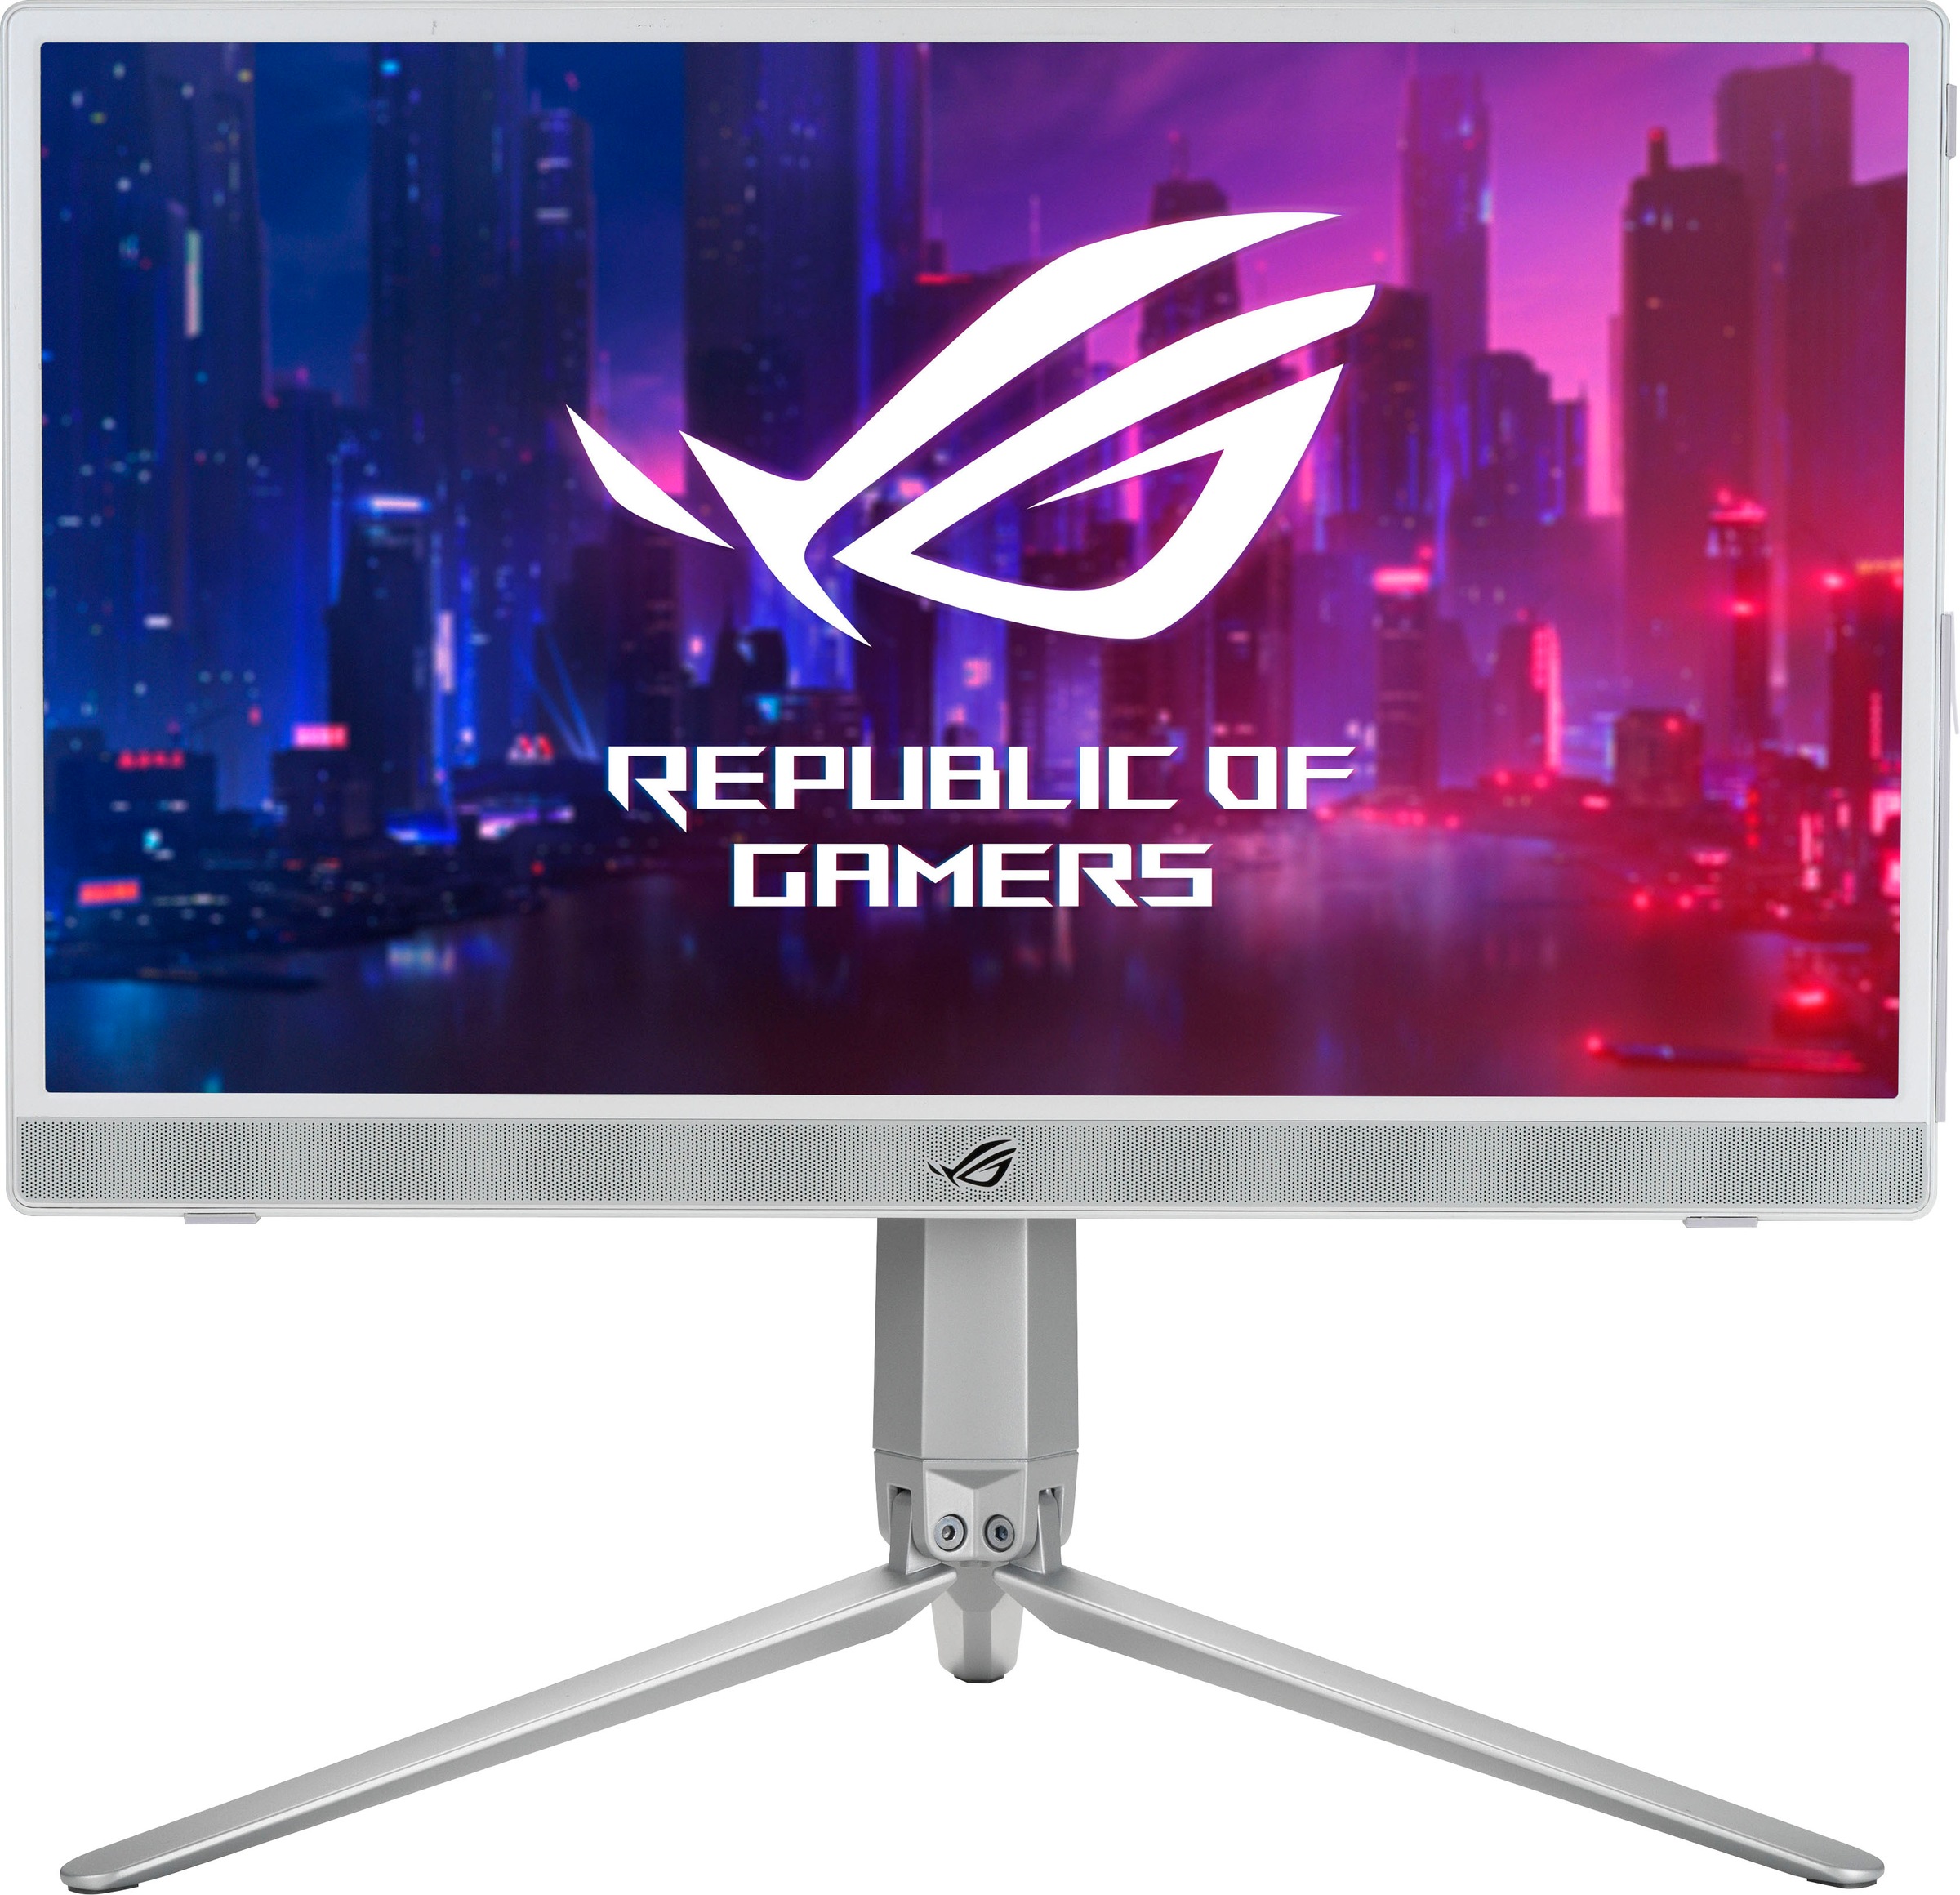 bei Asus 1080 cm/16 3 1920 Gaming-Monitor Zoll, 144 ms 40 Reaktionszeit, HD, Hz x »XG16AHP-W«, OTTO px, Full jetzt